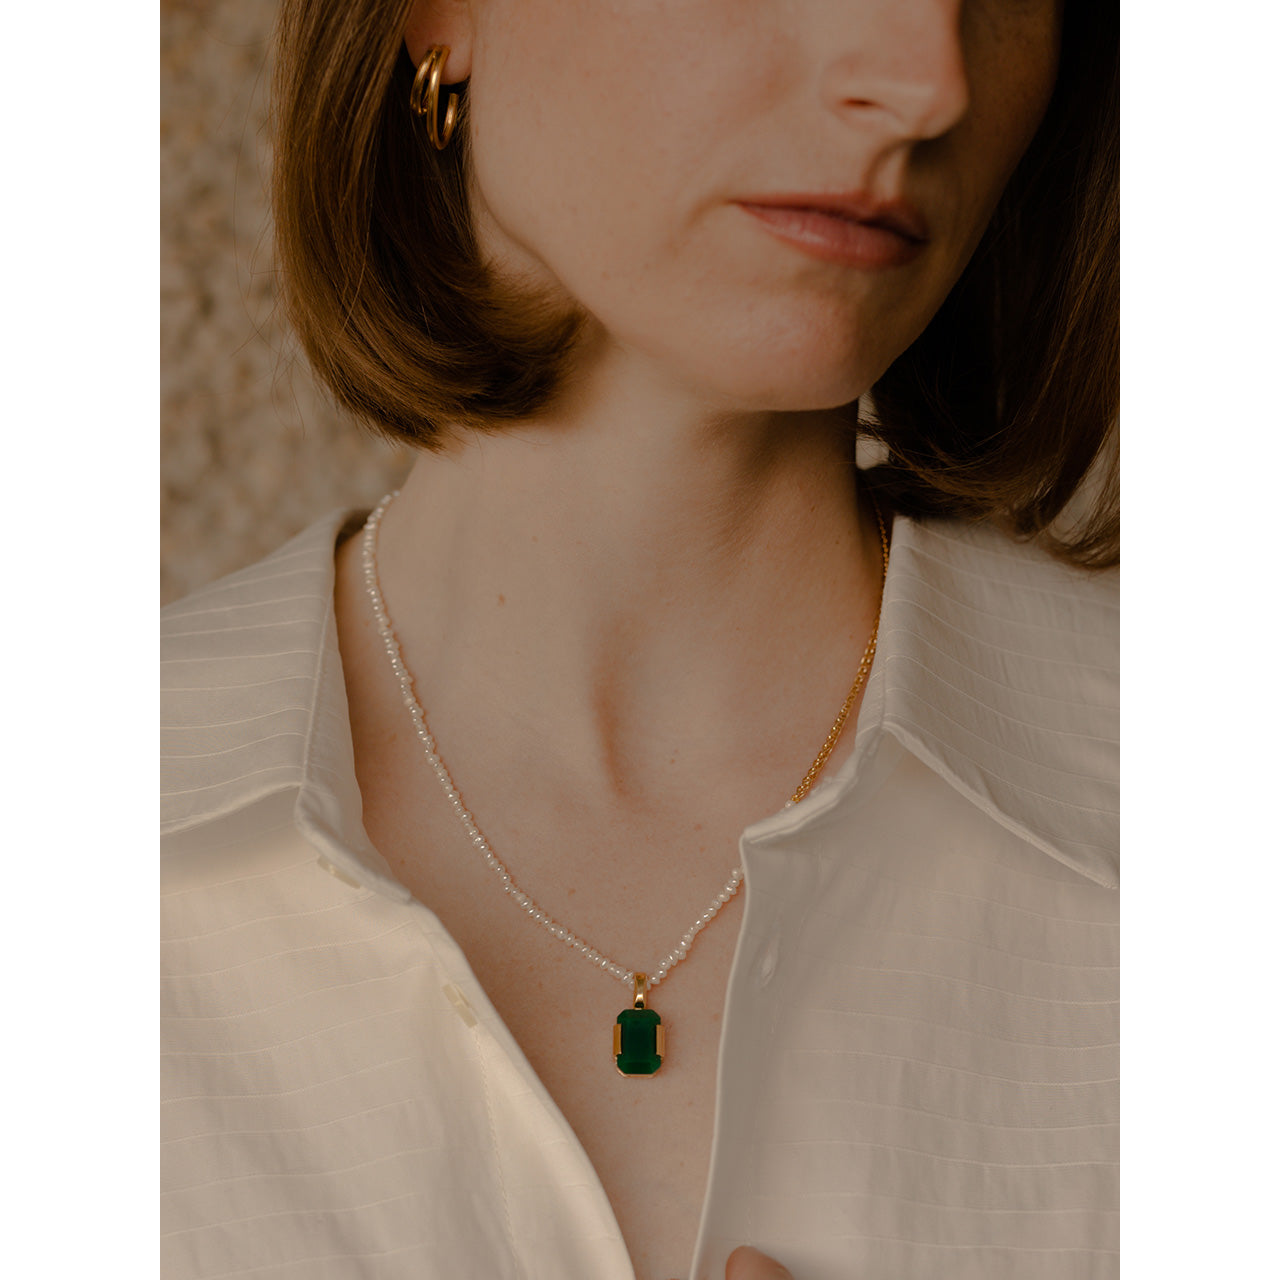 The Heritage necklace features a fusion of freshwater pearls and striking green agate.